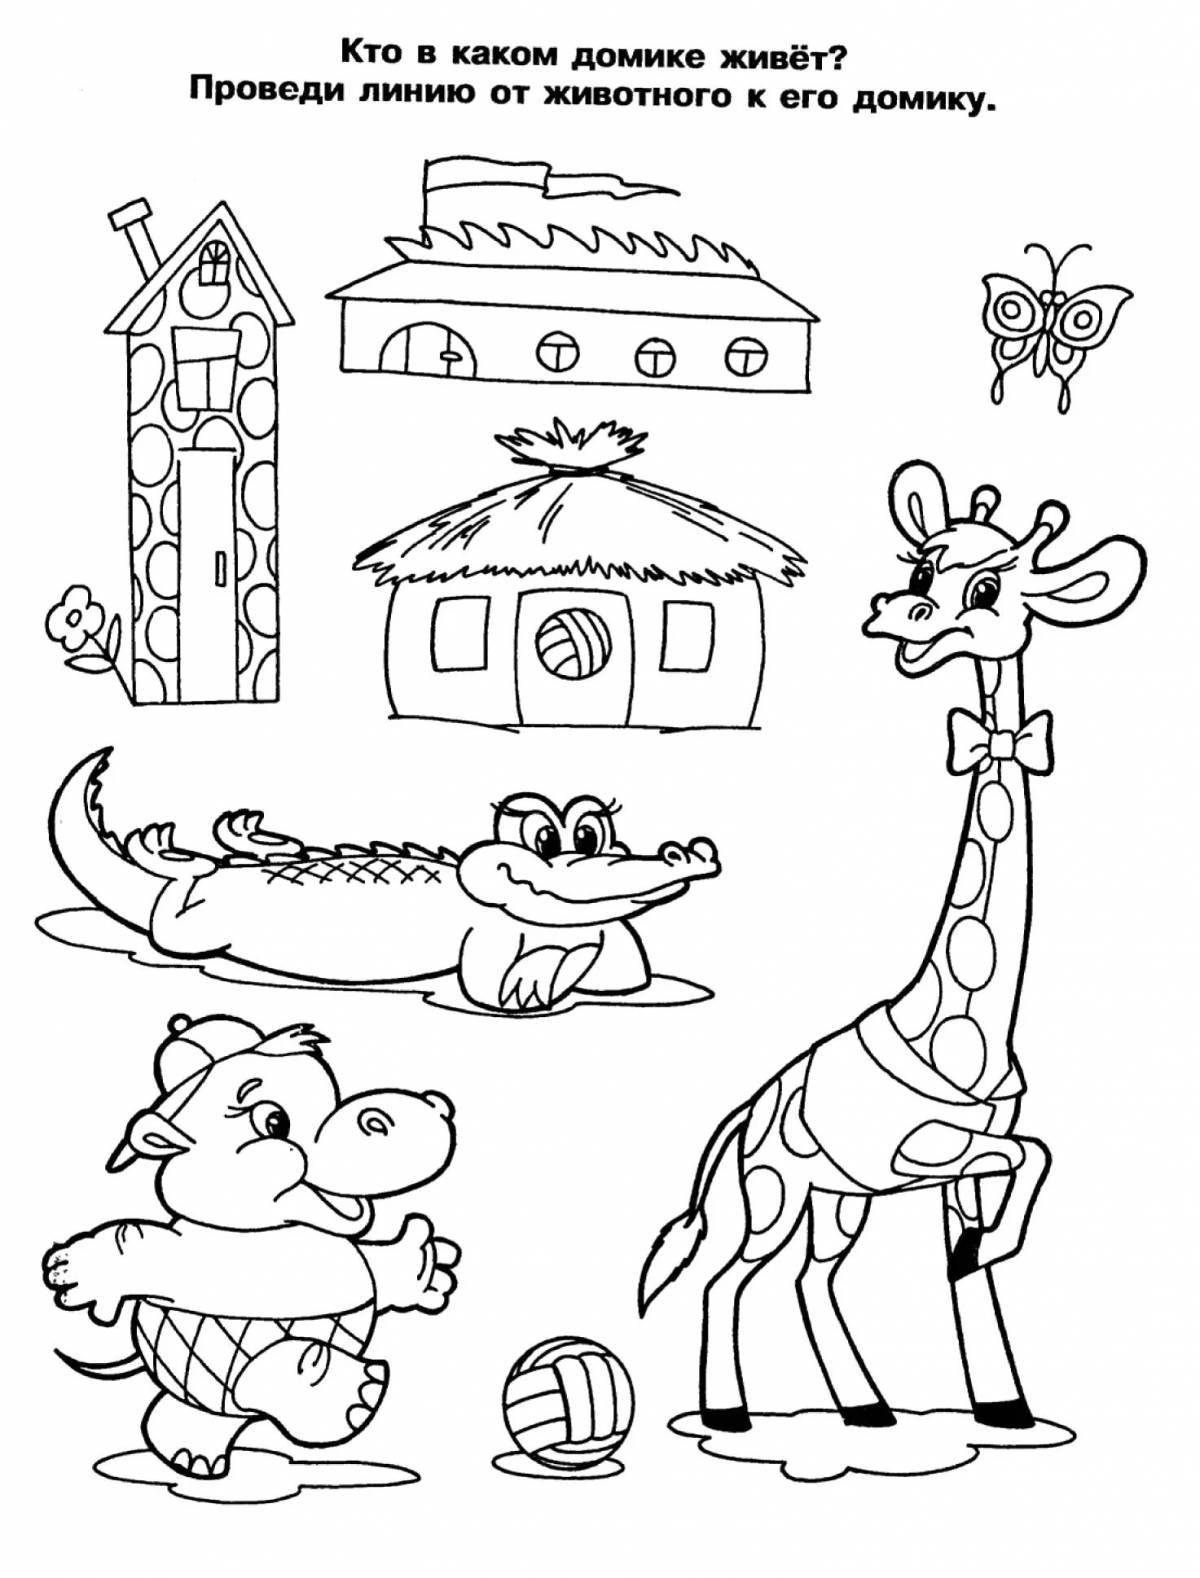 Educational logical coloring for children 3-4 years old